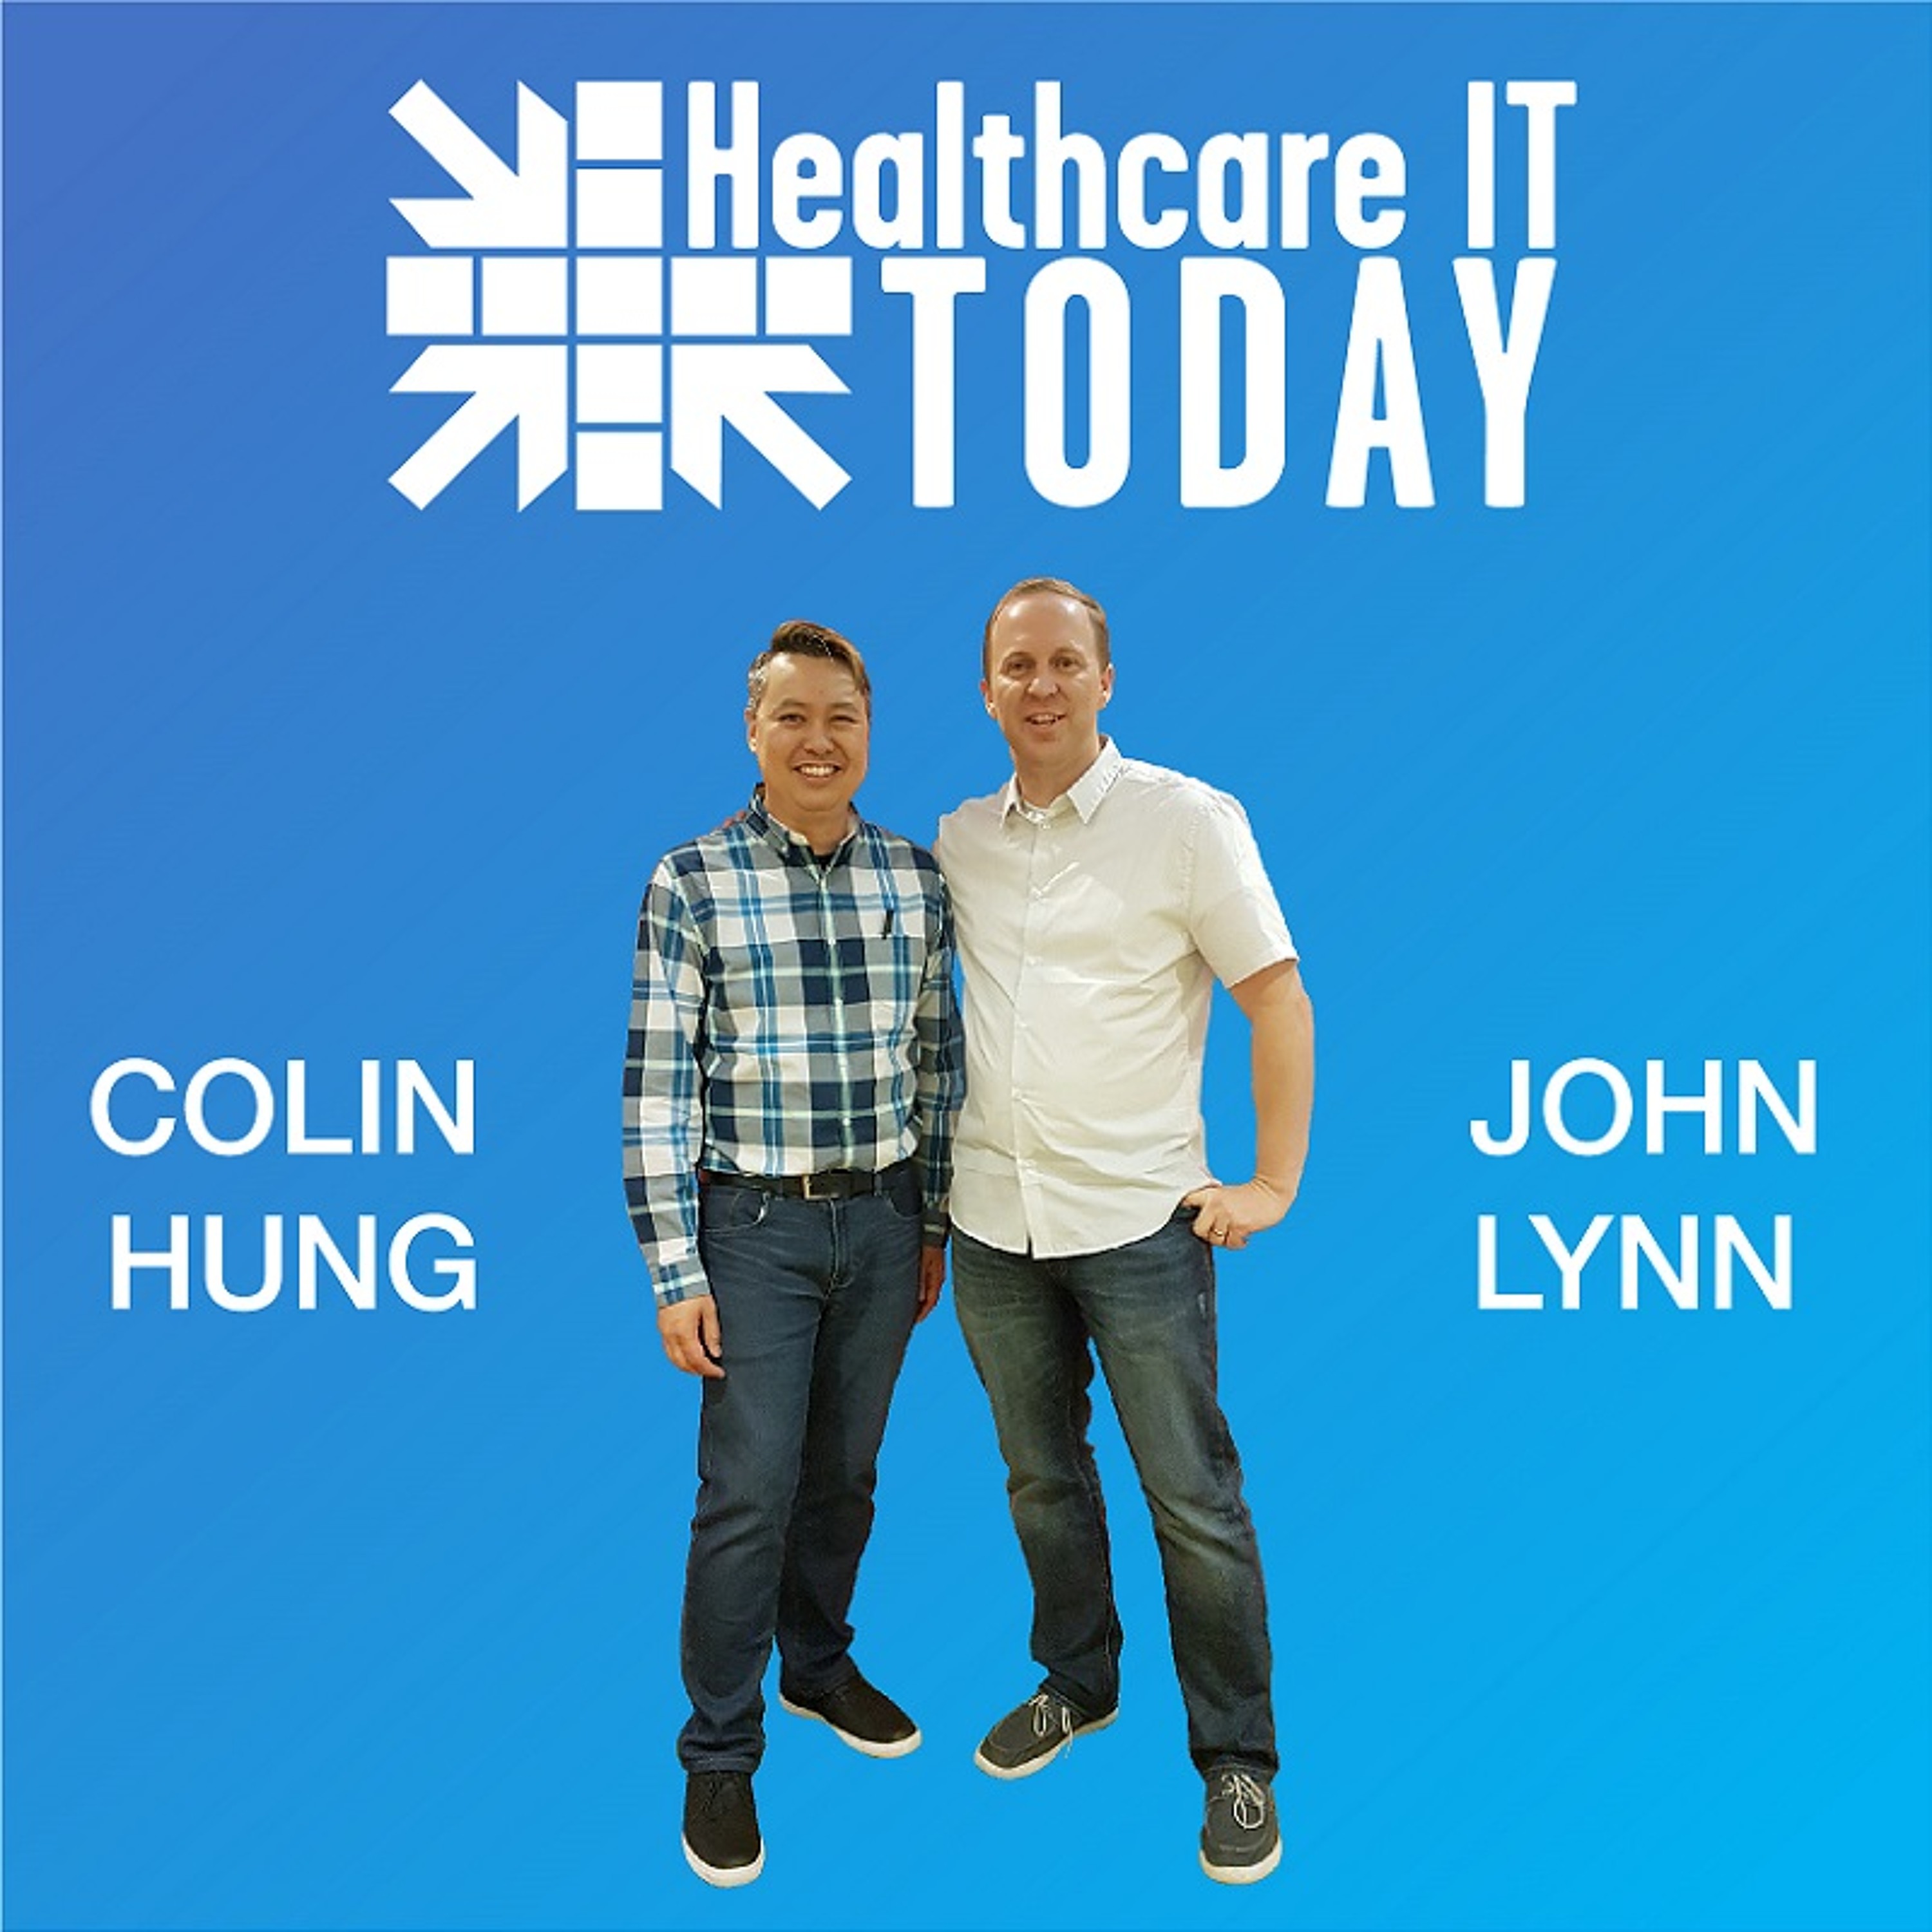 Healthcare IT Today: Important Healthcare Technologies